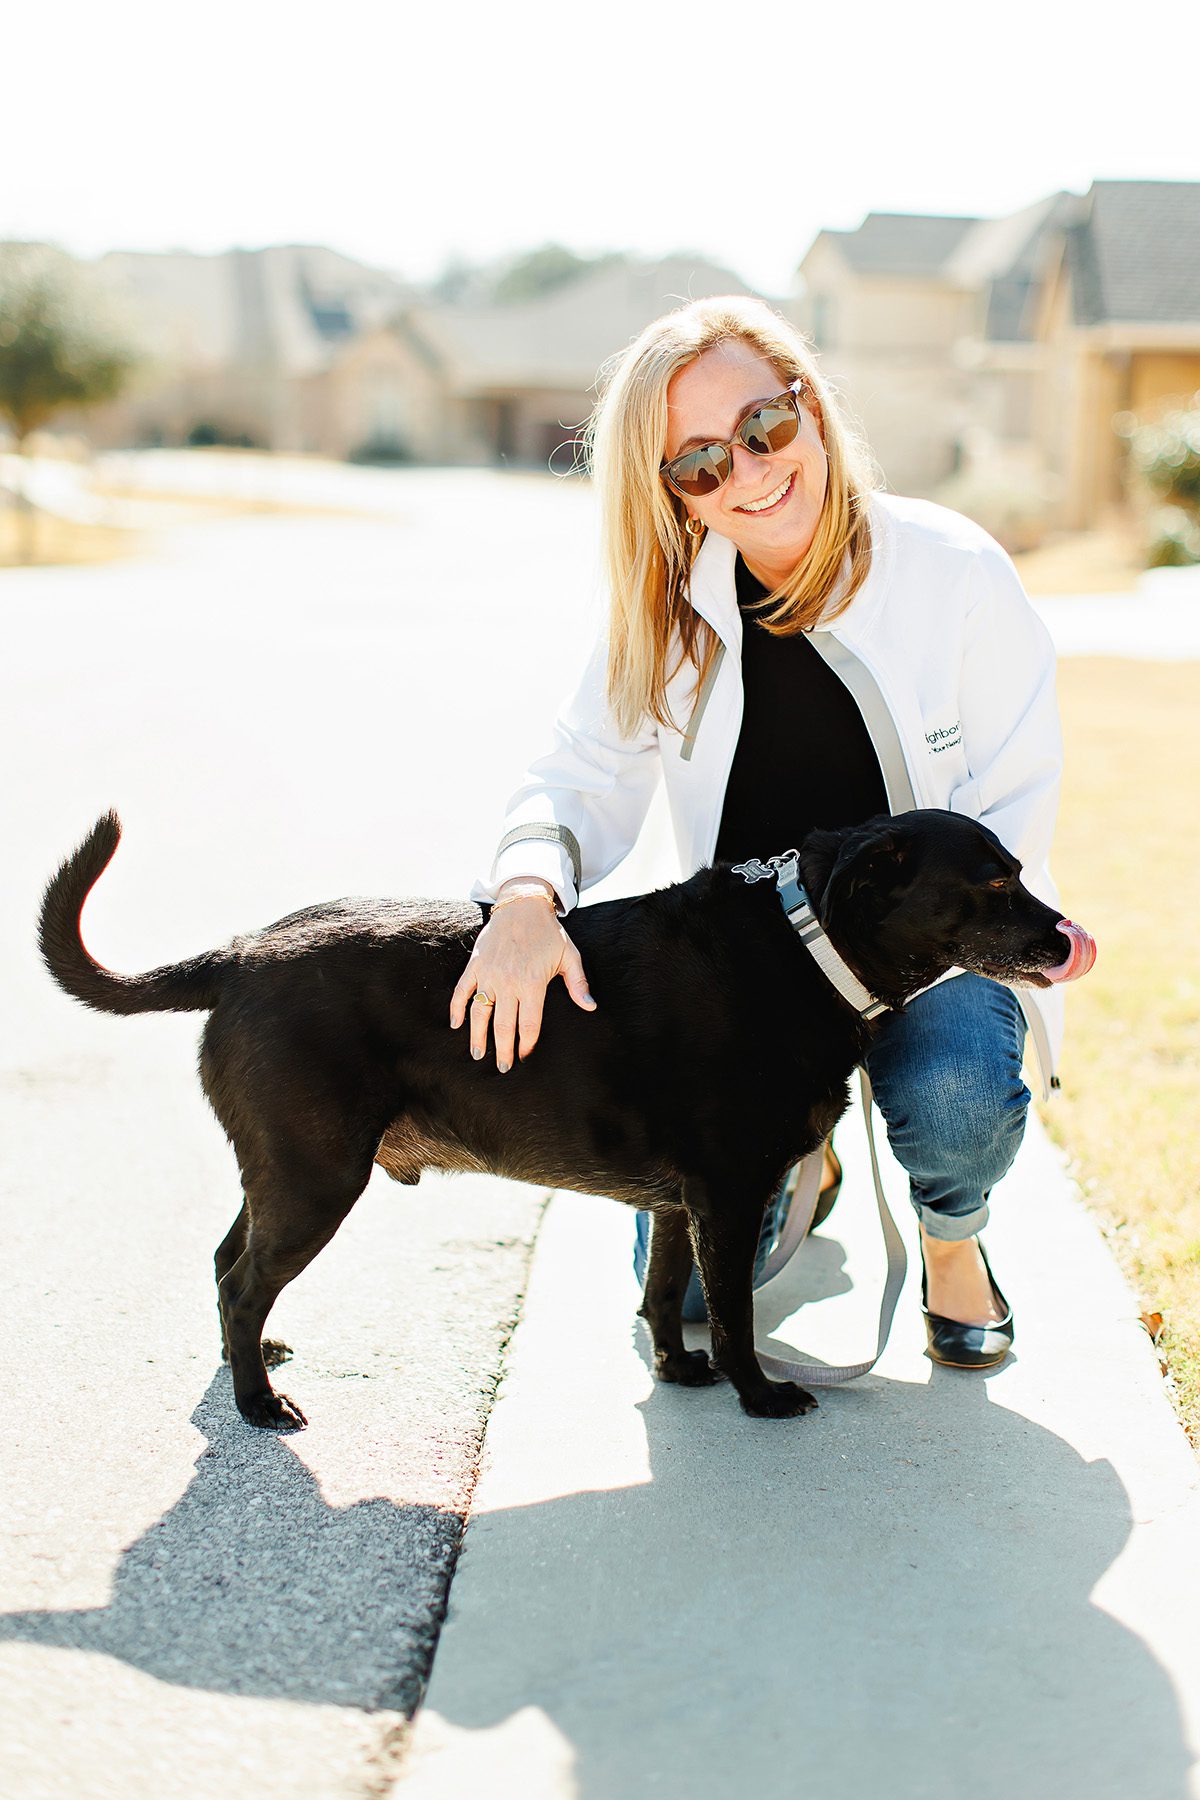 Fawn Crosby Dripping Springs lender with Neighborhood Loans walking her dog Clay